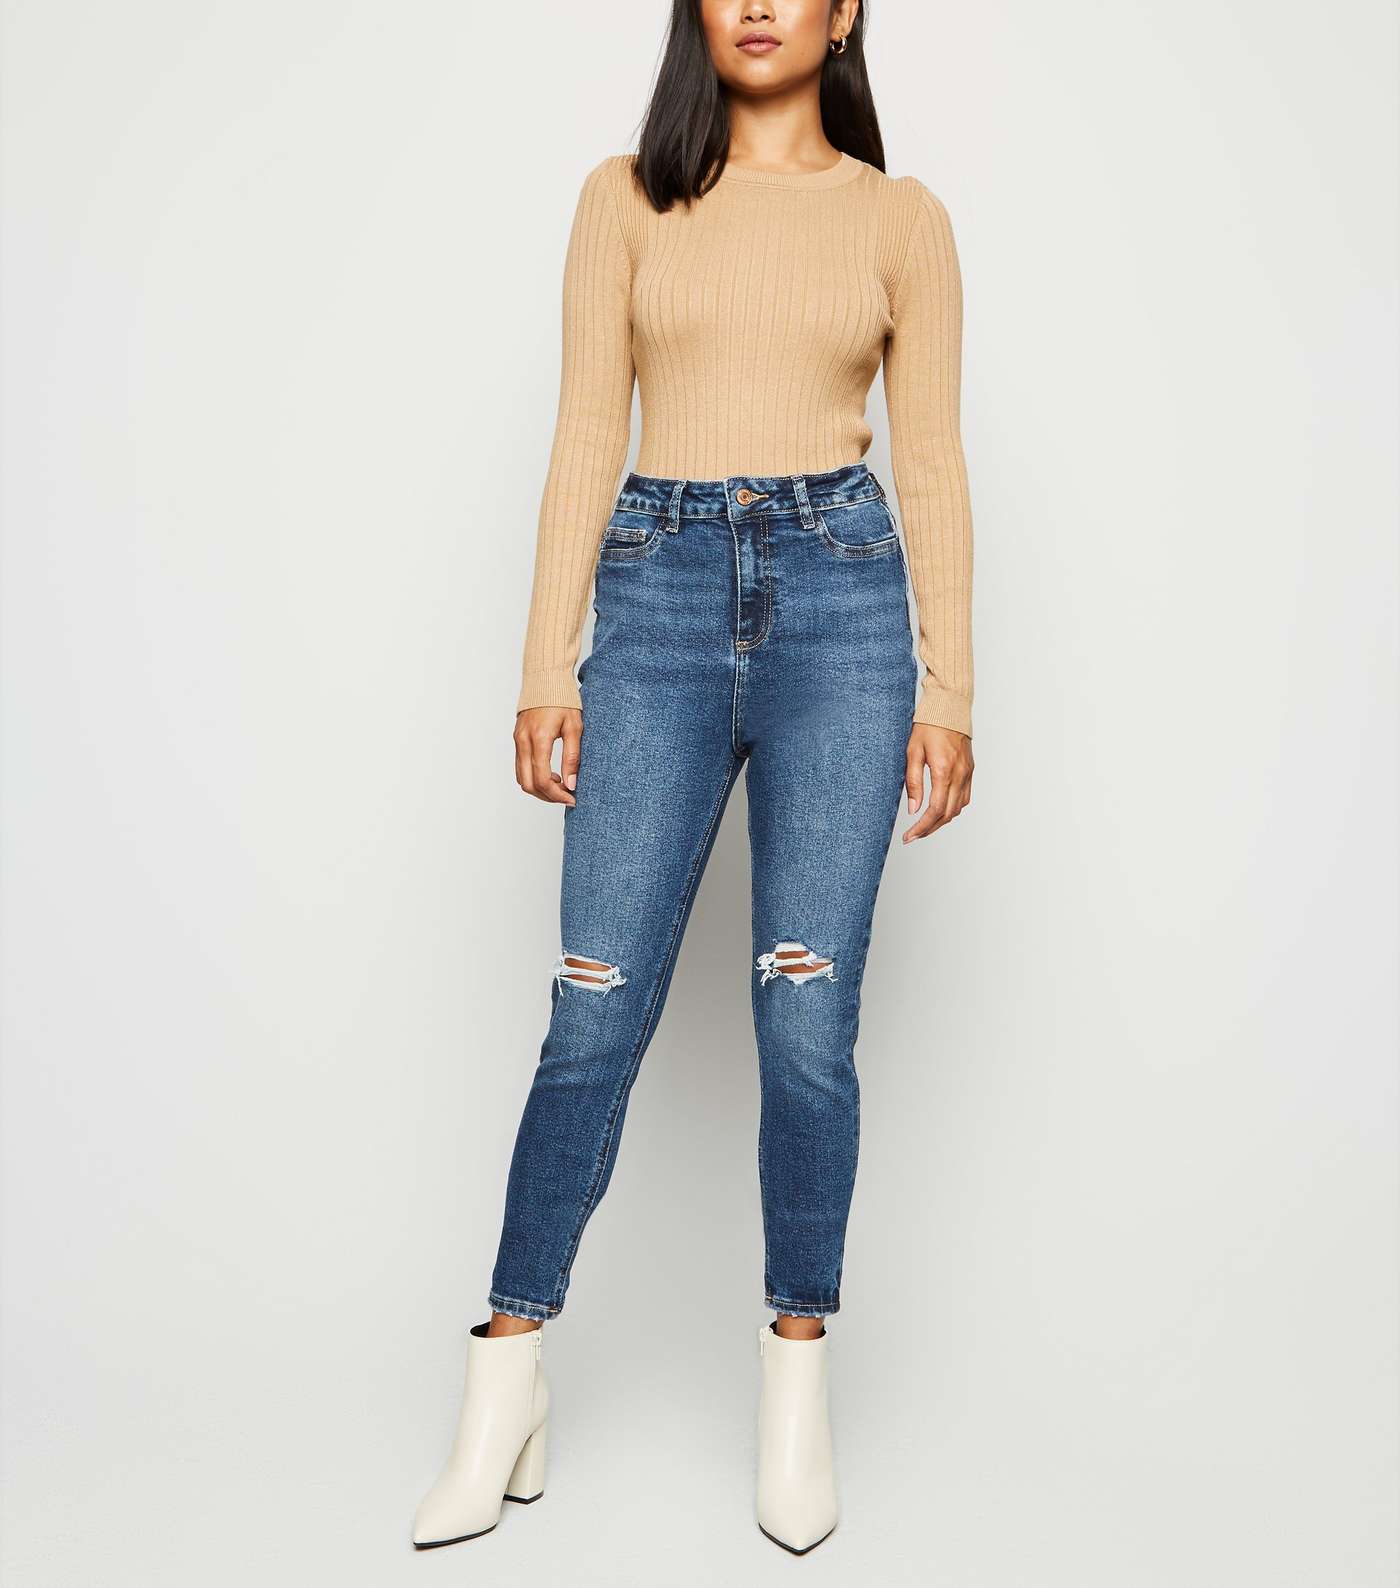 Petite Blue Rinse Wash Ripped High Waist Super Skinny Jeans